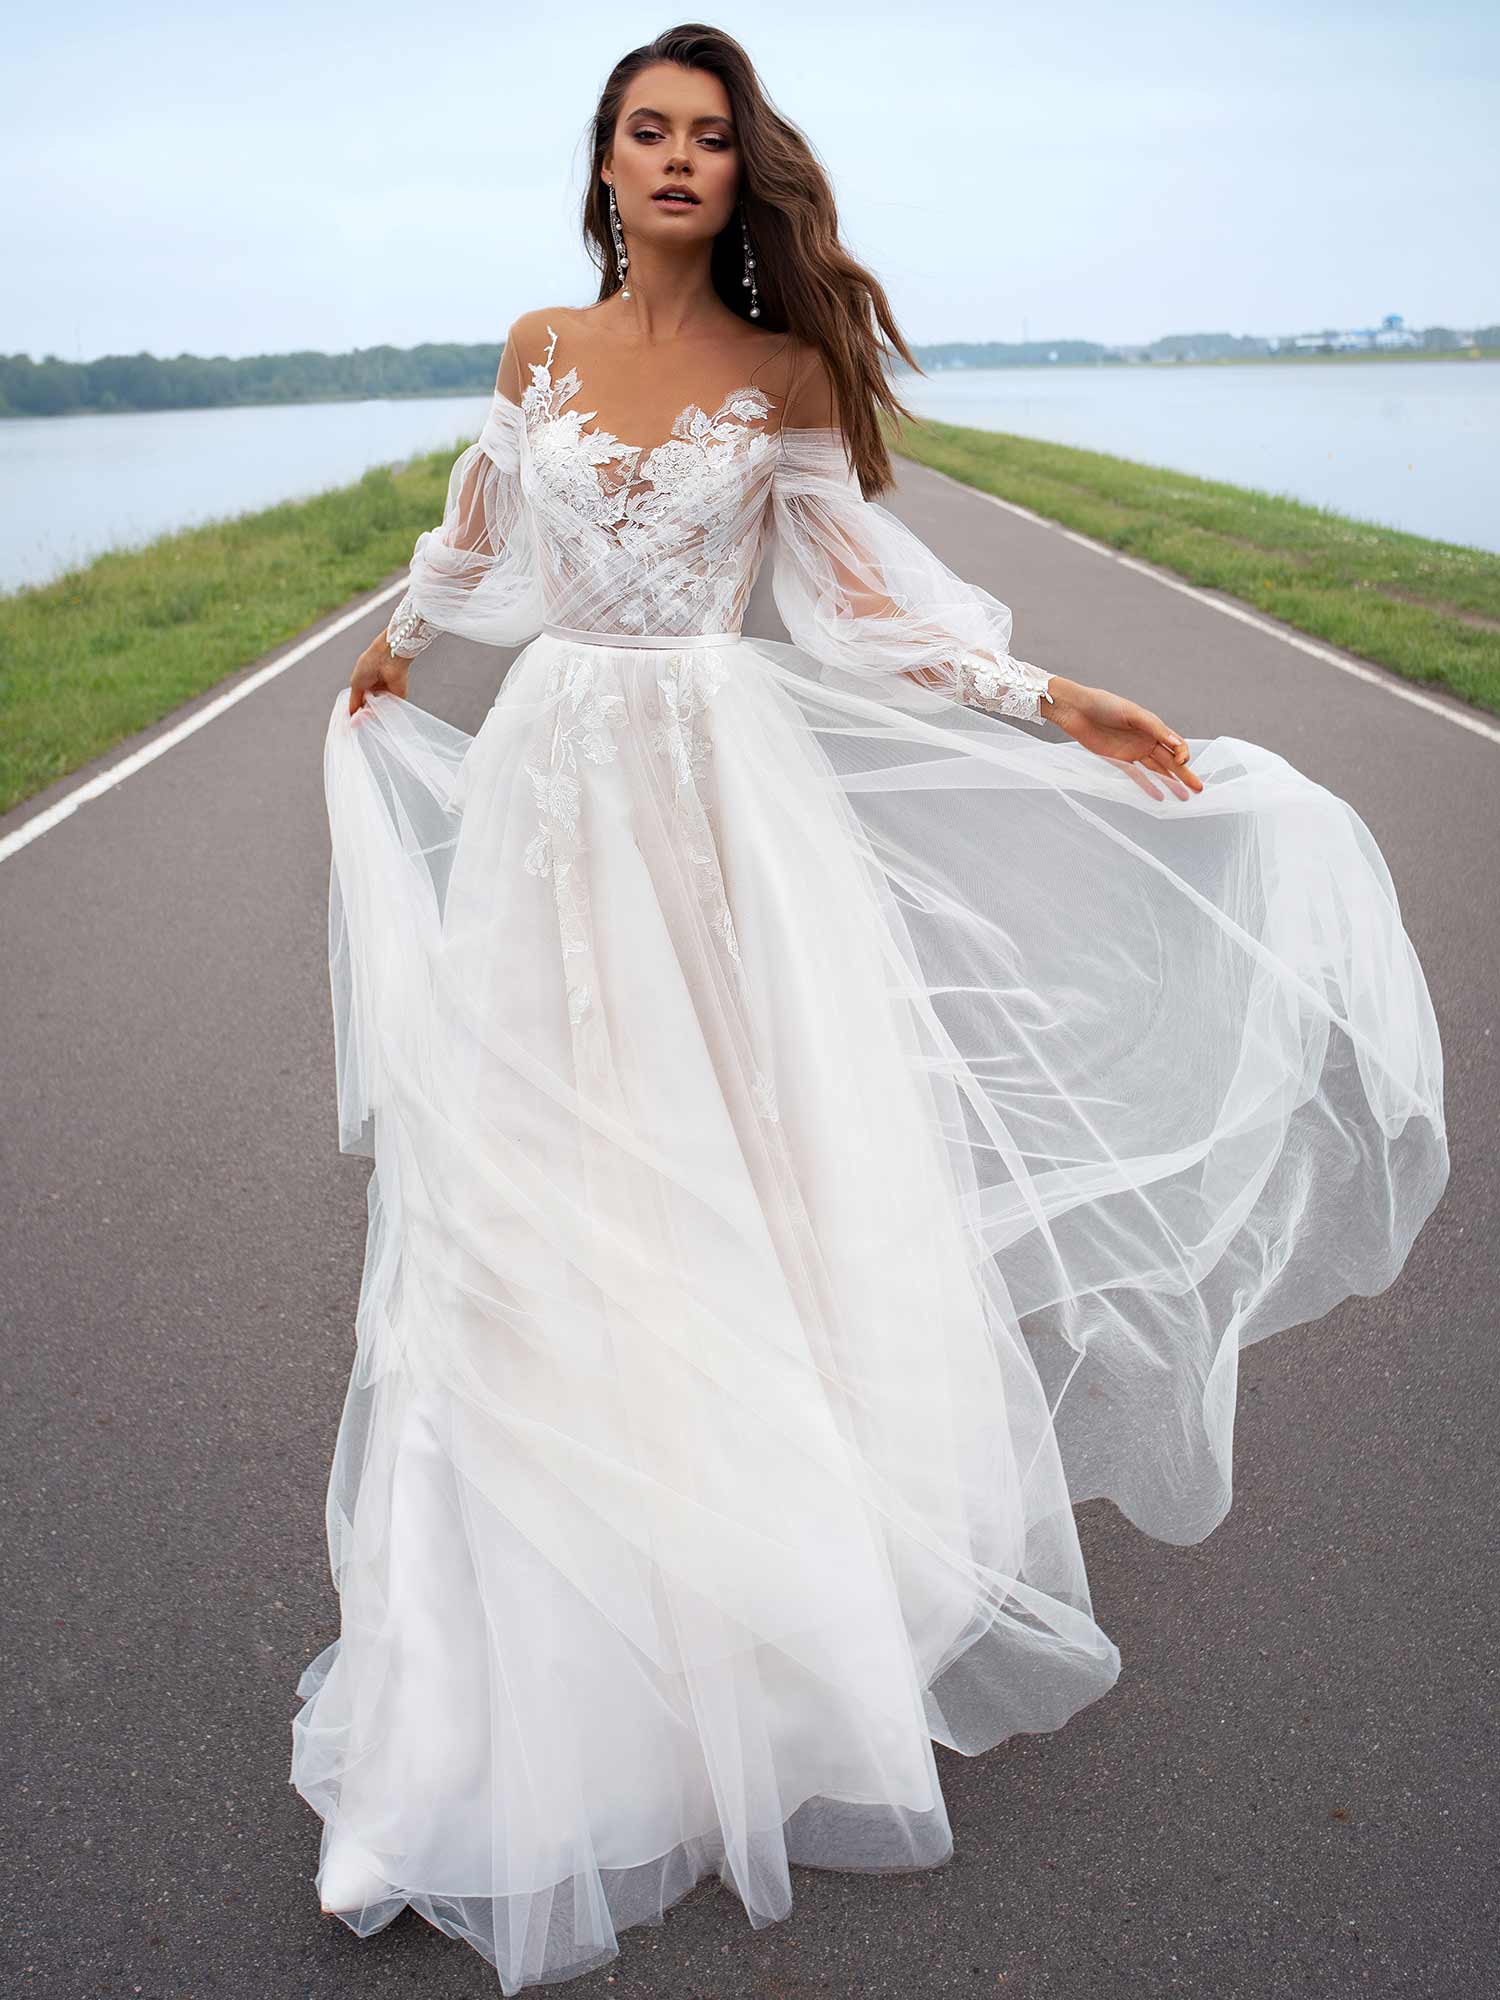 Amazing Long Casual Wedding Dresses  The ultimate guide 